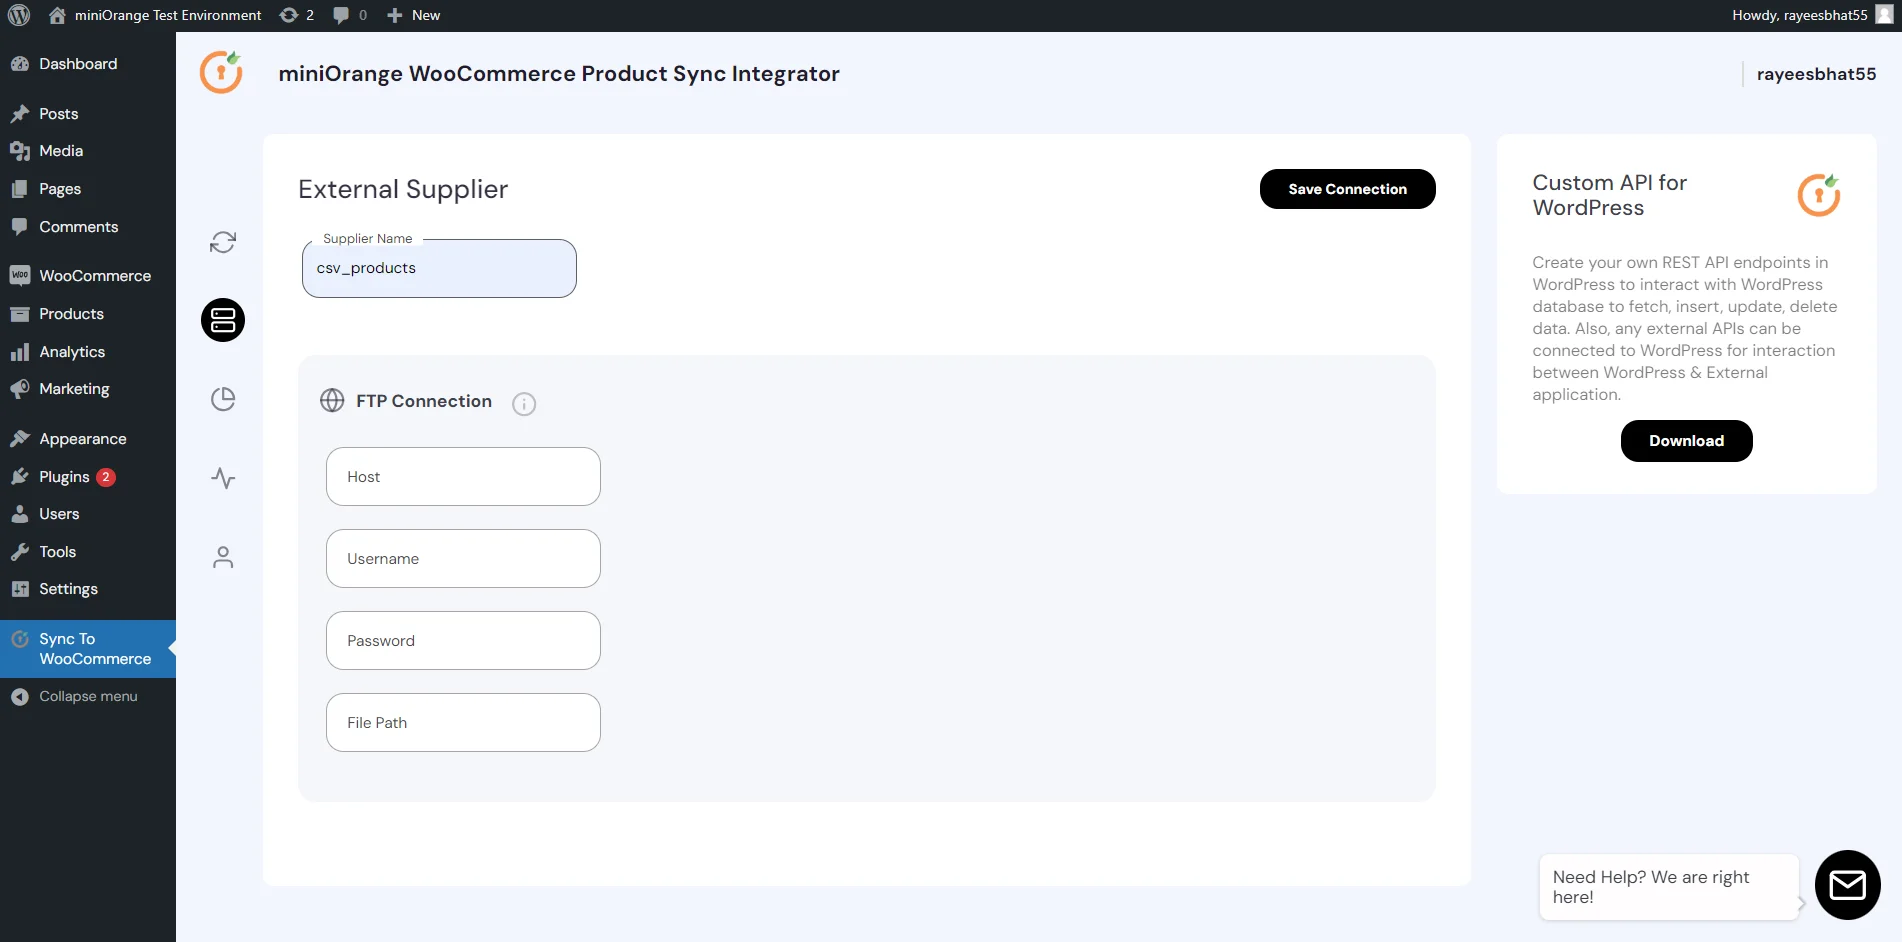 Configure WooCommerce Product Sync - Select the FTP connection